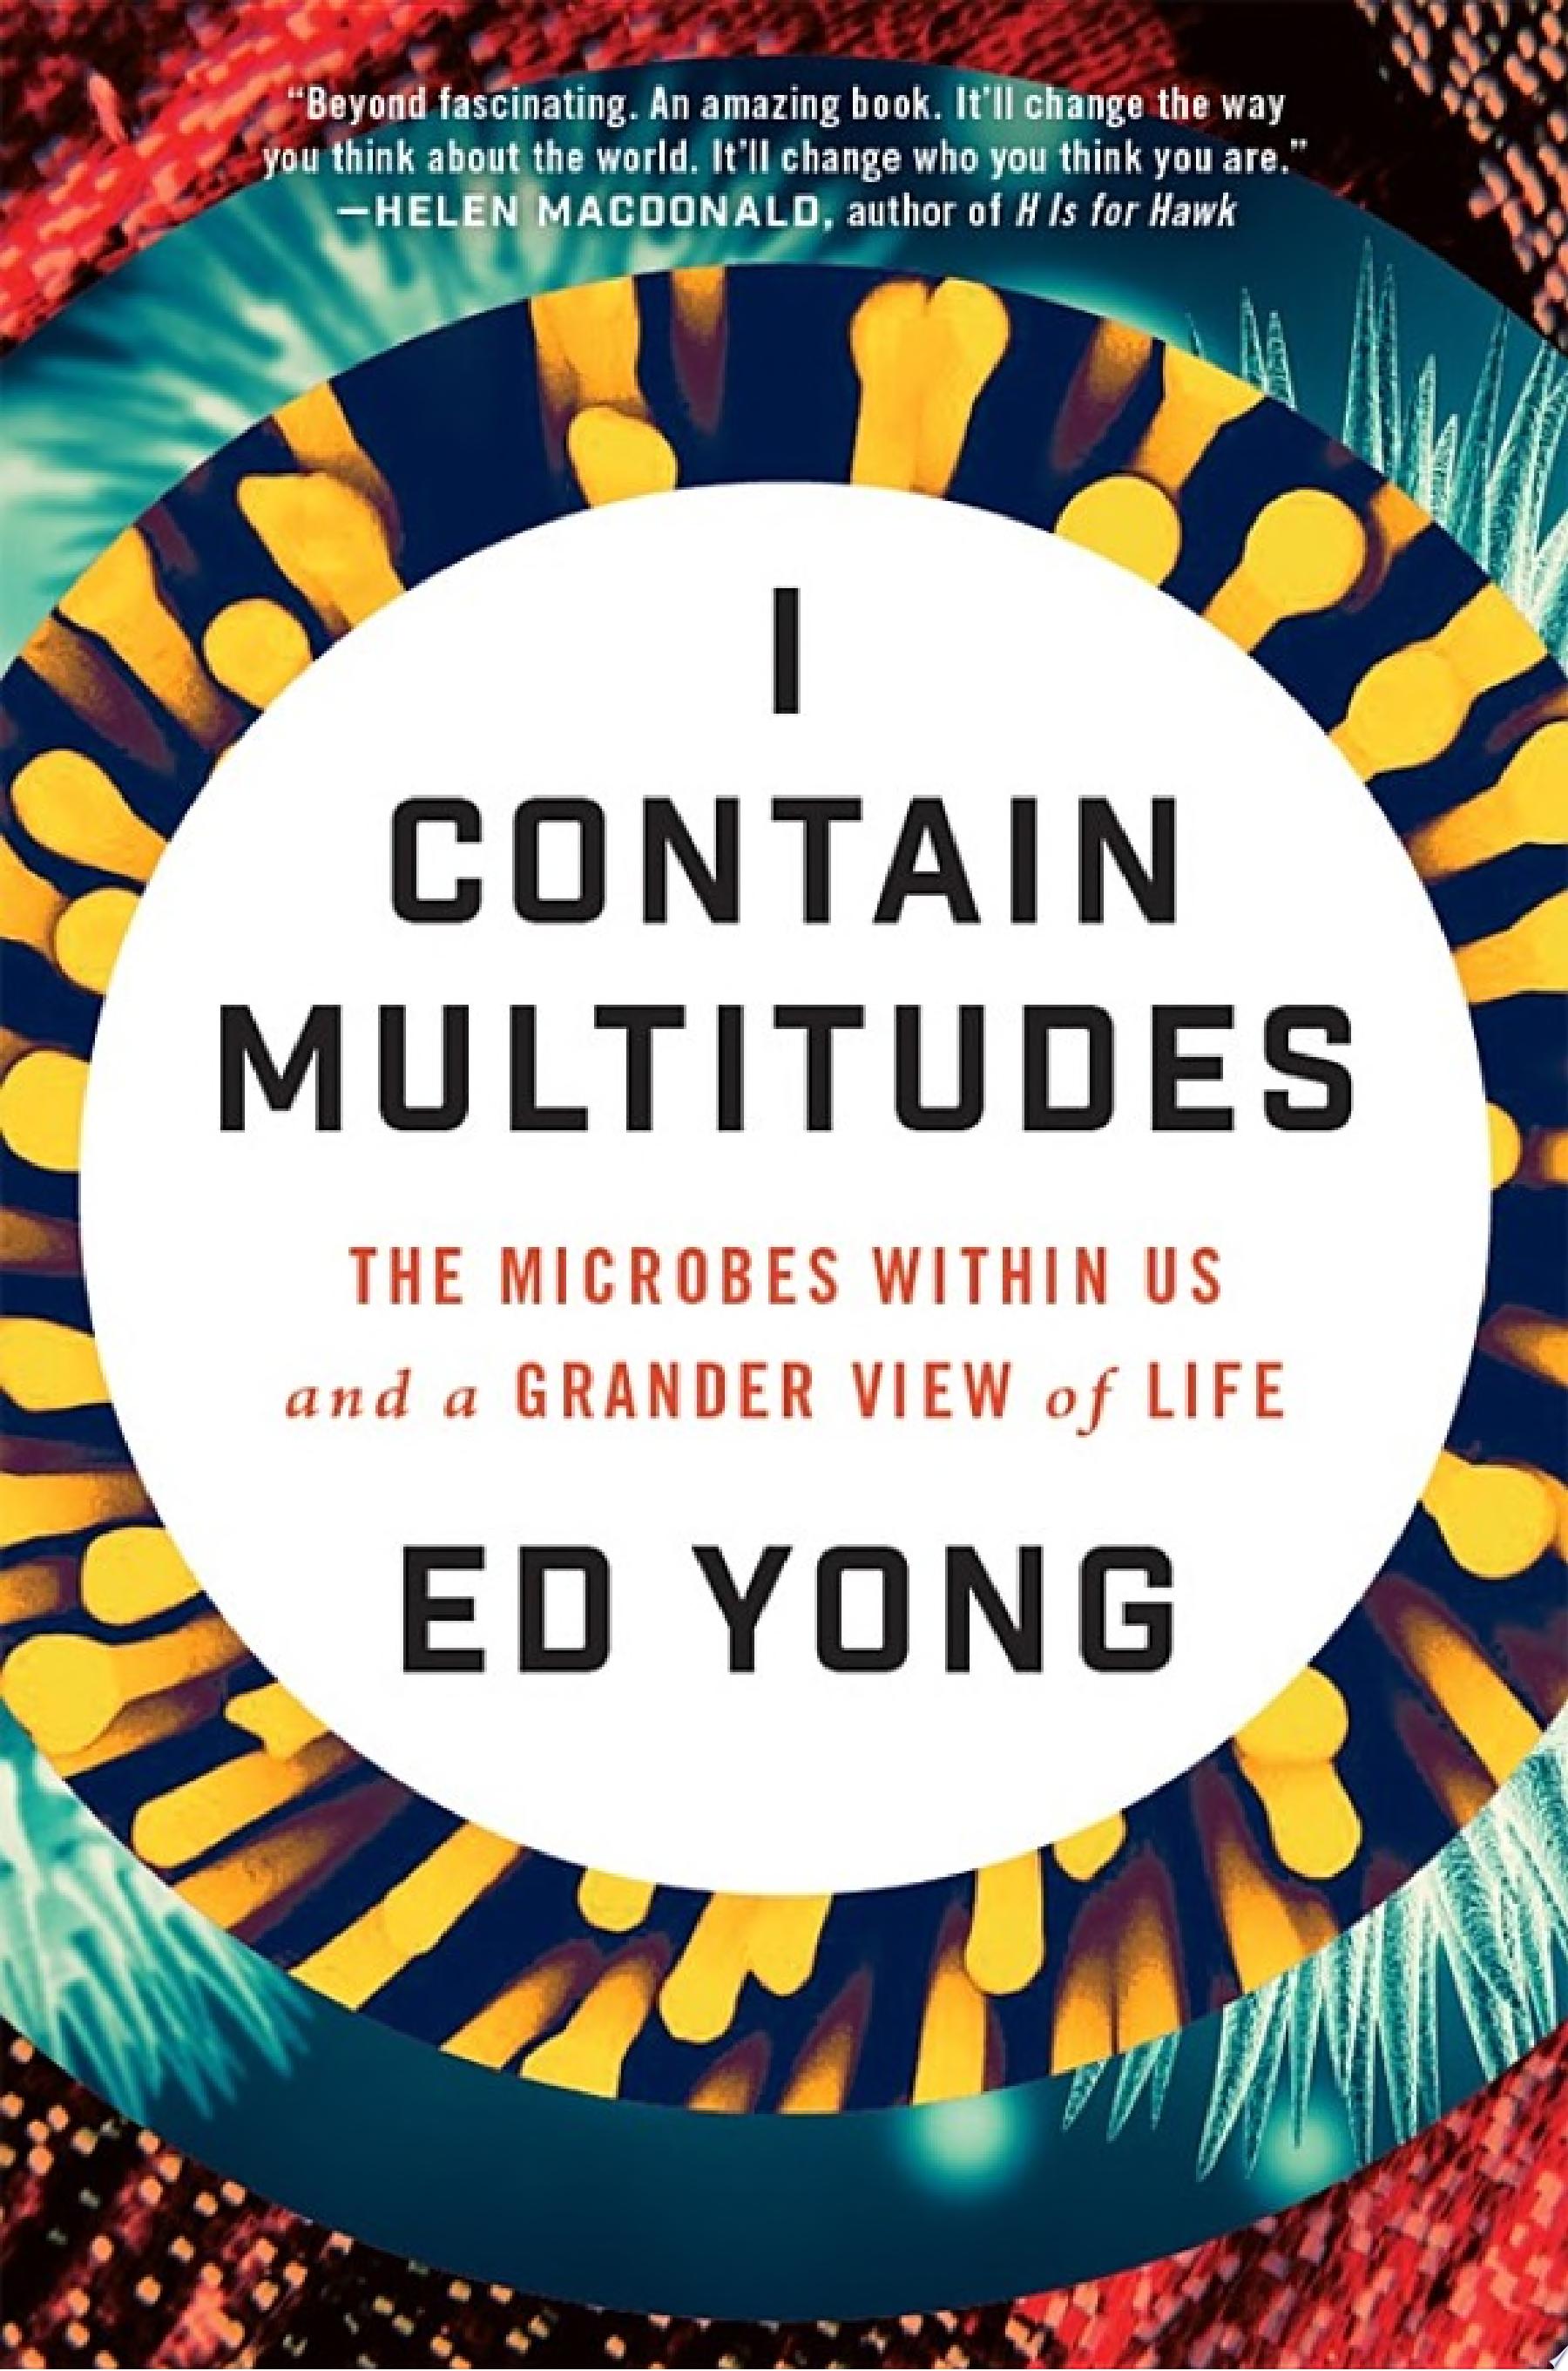 Image for "I Contain Multitudes"